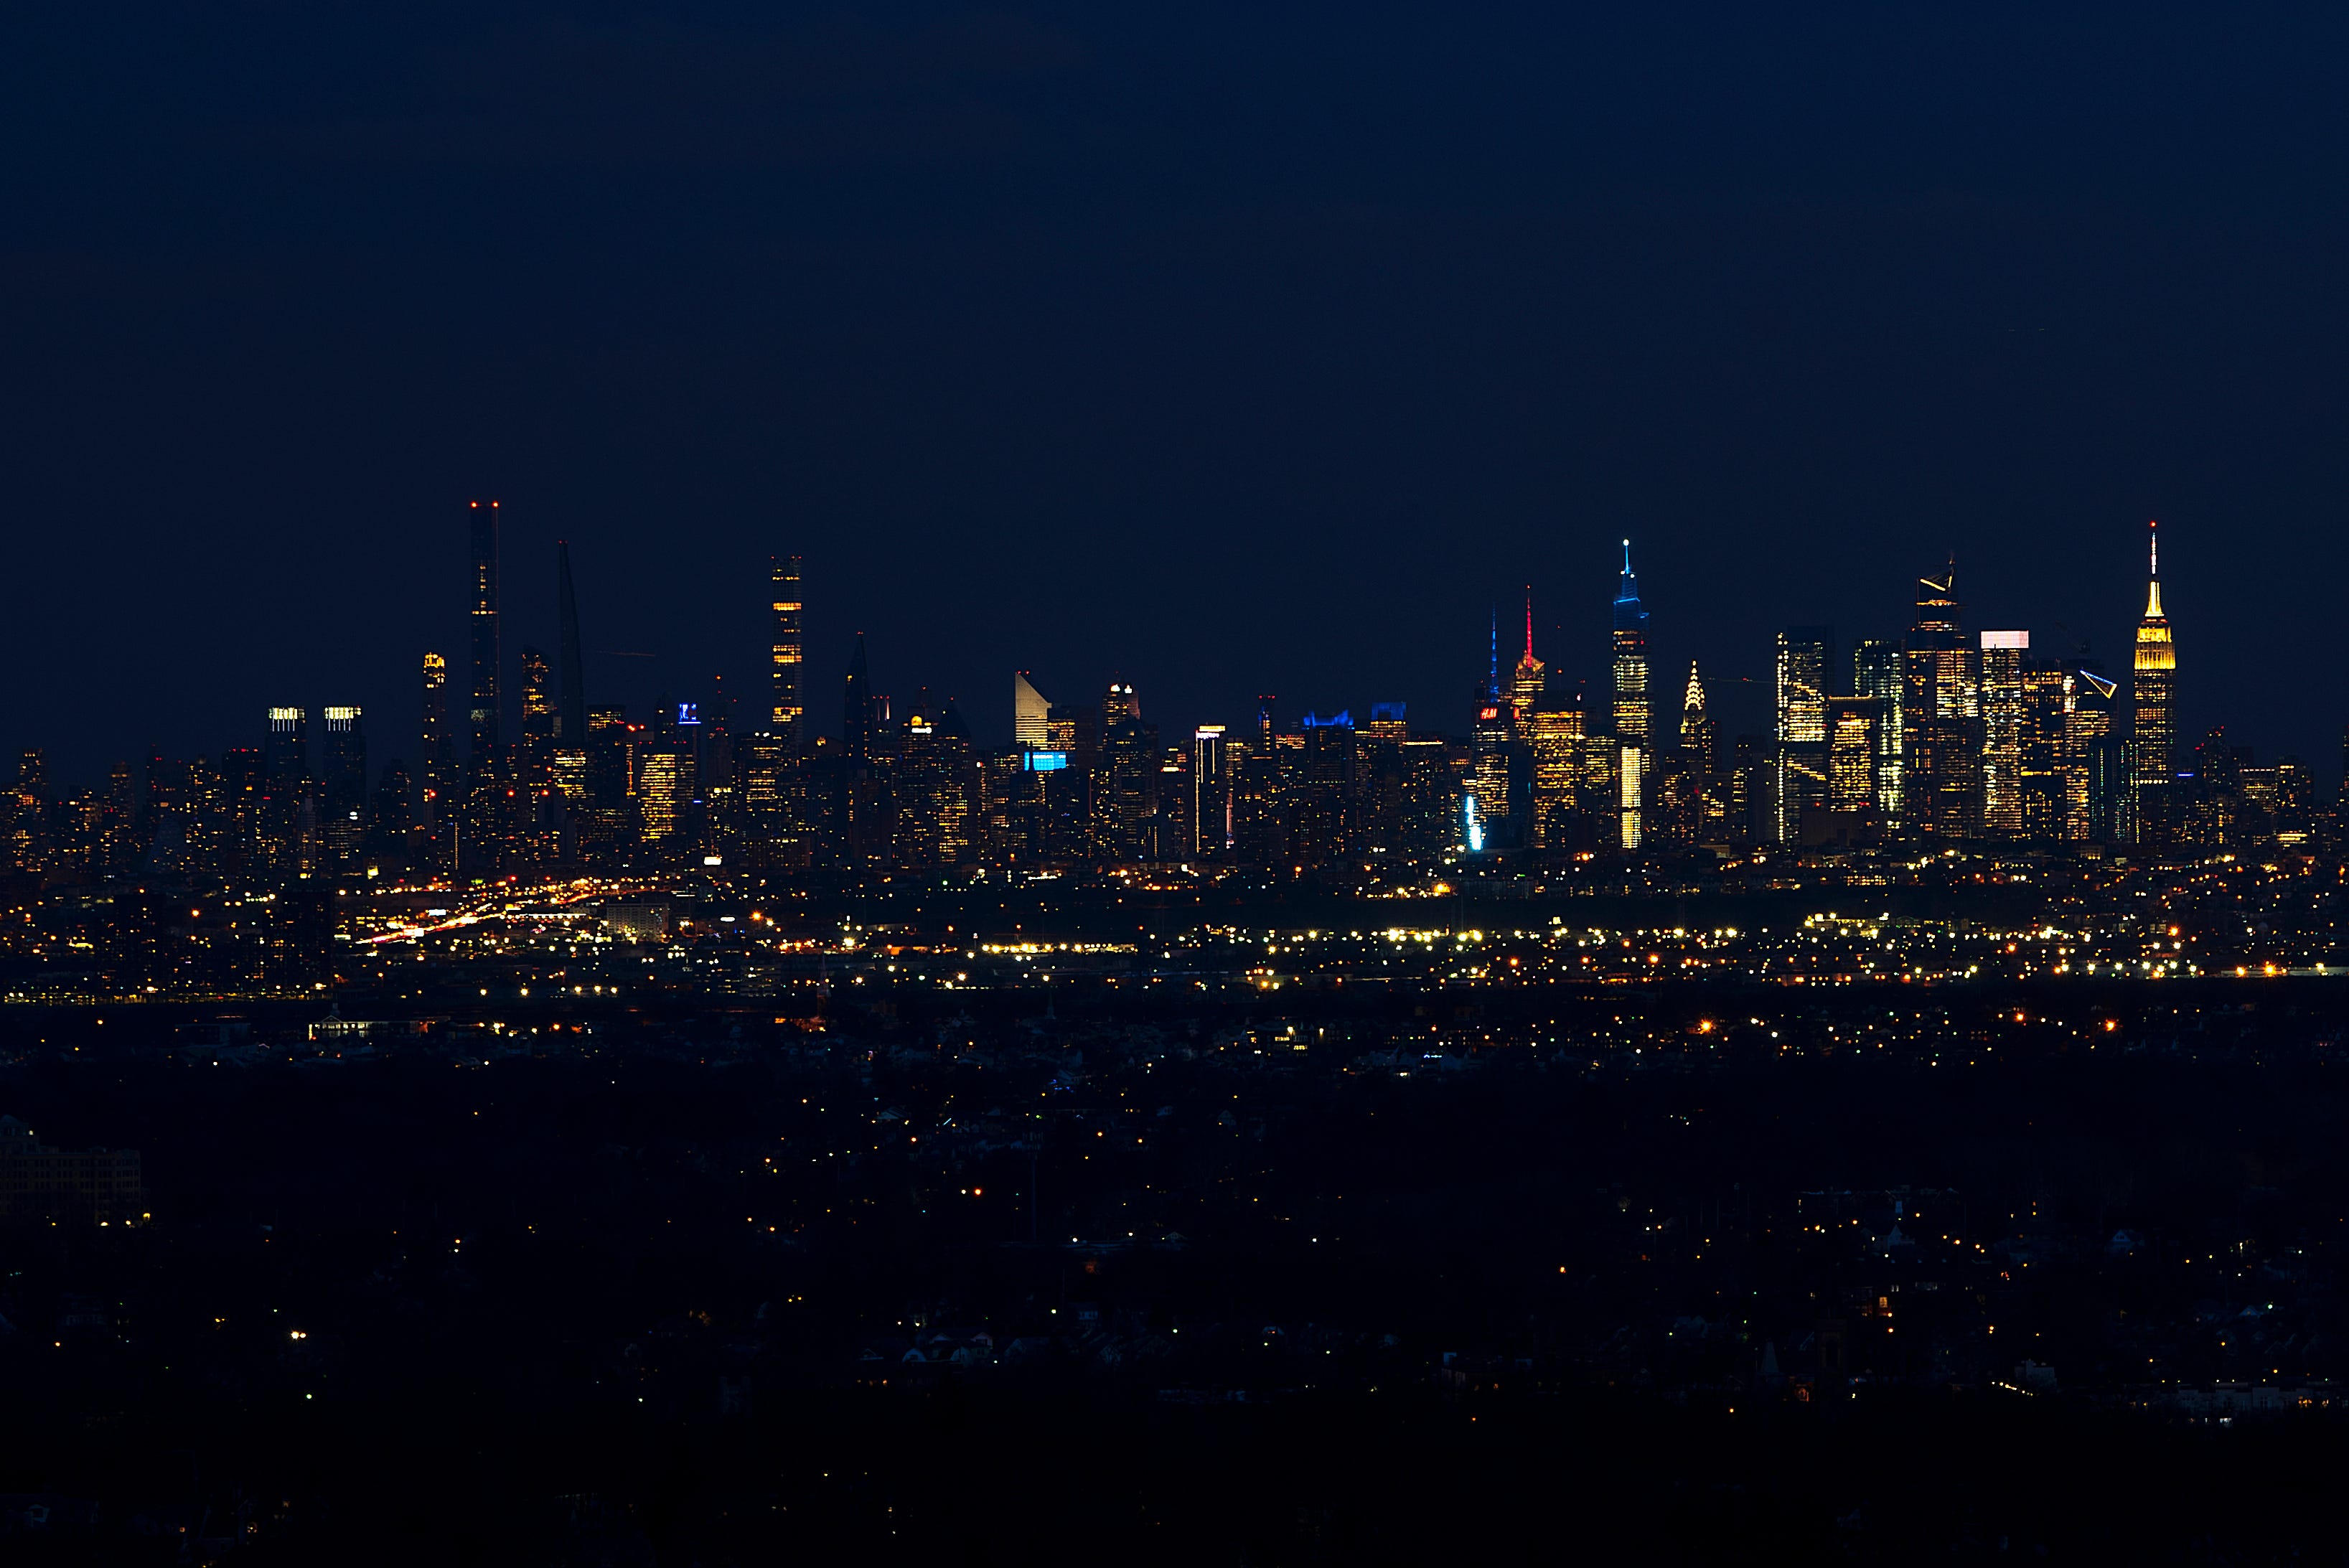 The New York City skyline as seen from Eagle Rock Reservation in West Orange on a December evening.